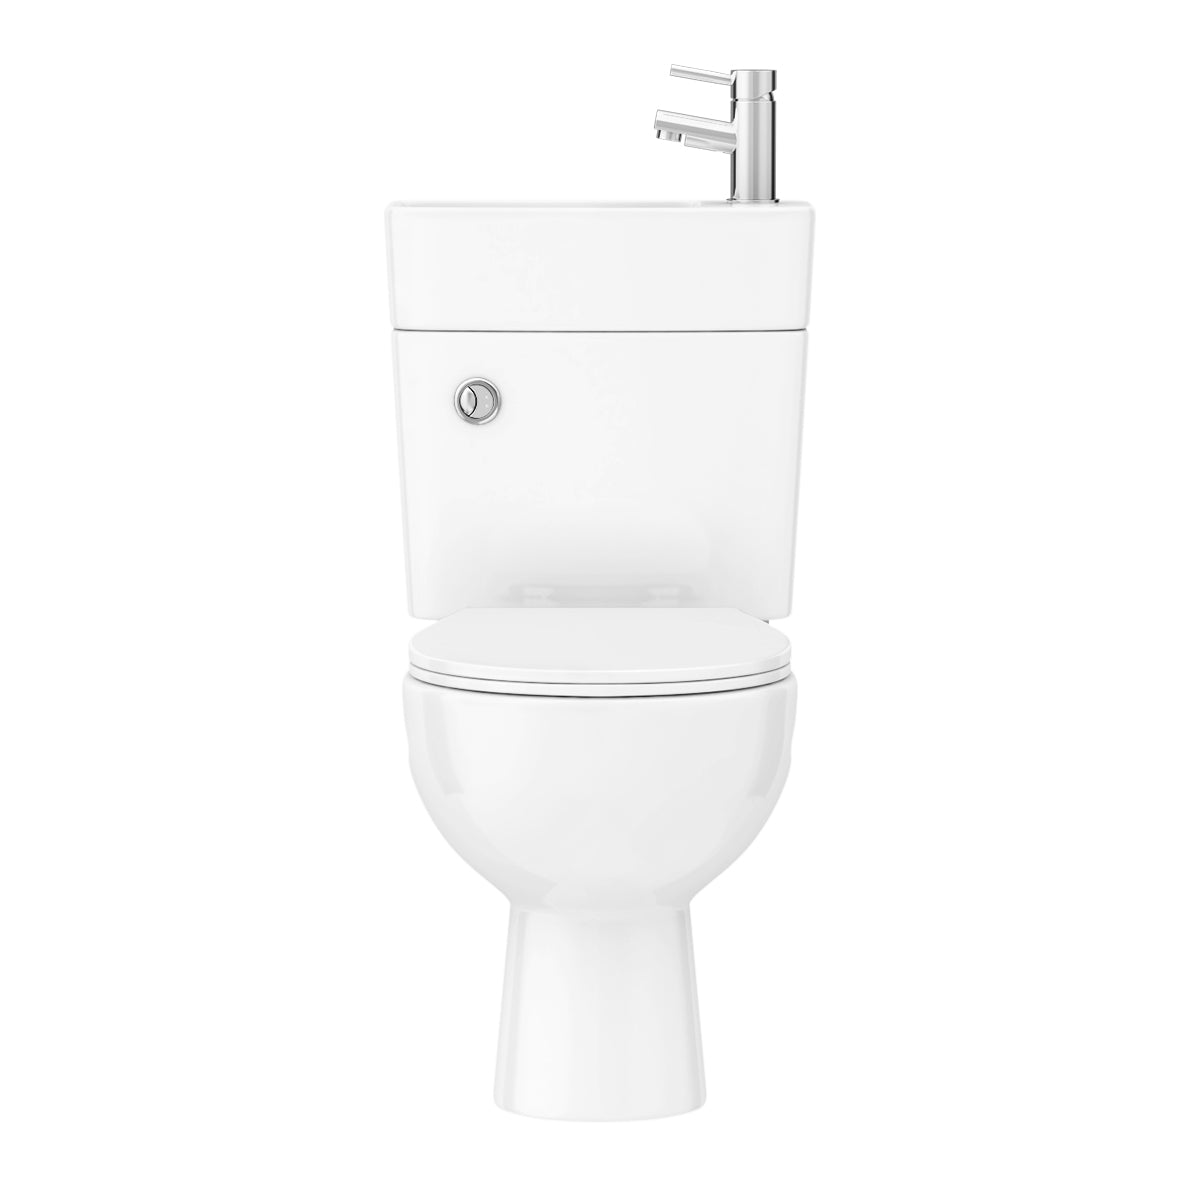 Promo | Modern 2 in 1 Compact Combo White Basin and Close Coupled Toilet